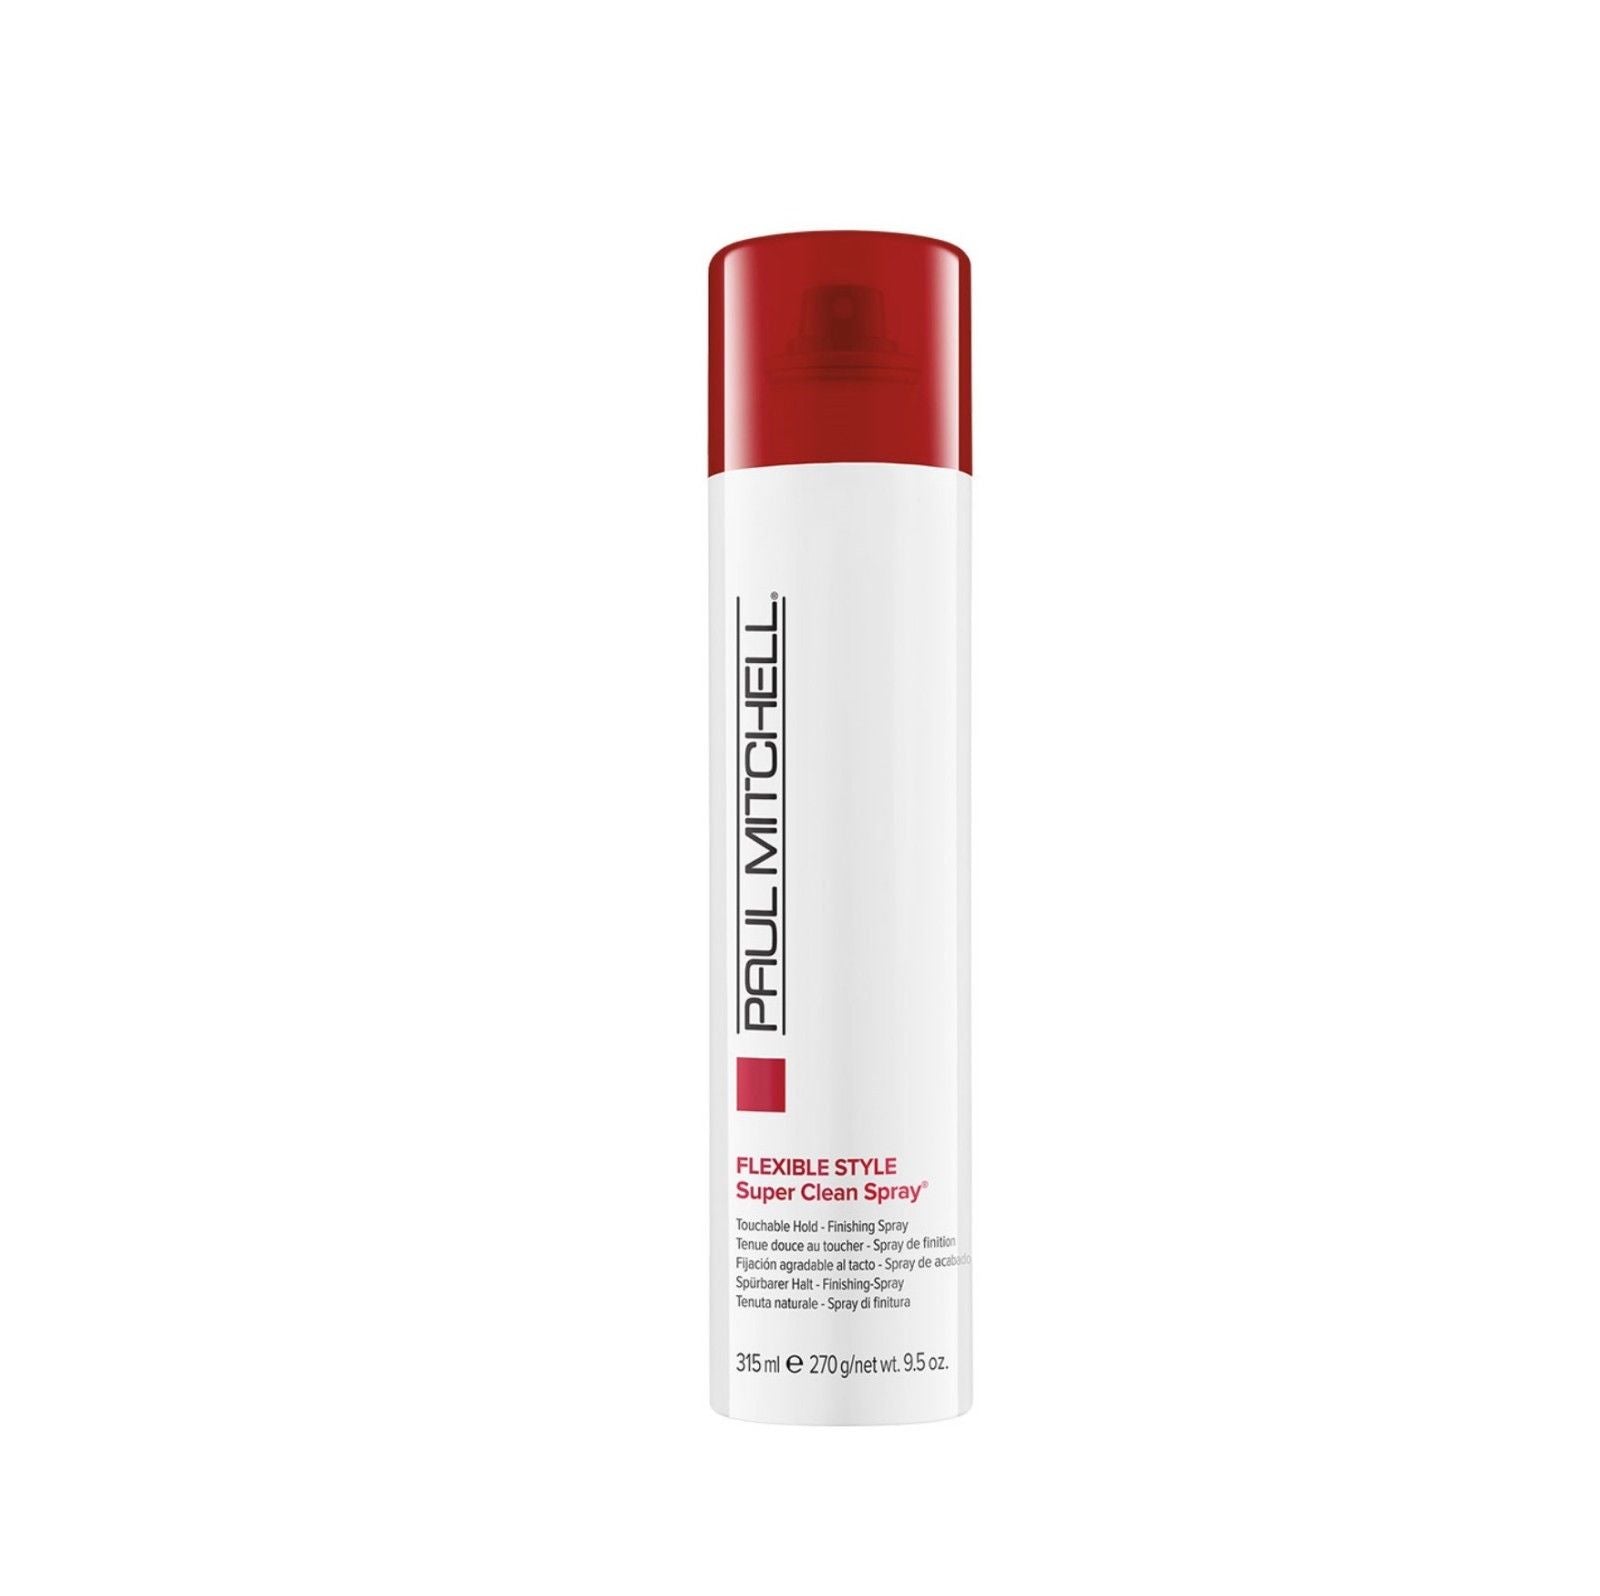 Paul Mitchell Flexible Style Super Clean Spray Touchable Hold Finish 315ml Paul Mitchell Styling - On Line Hair Depot